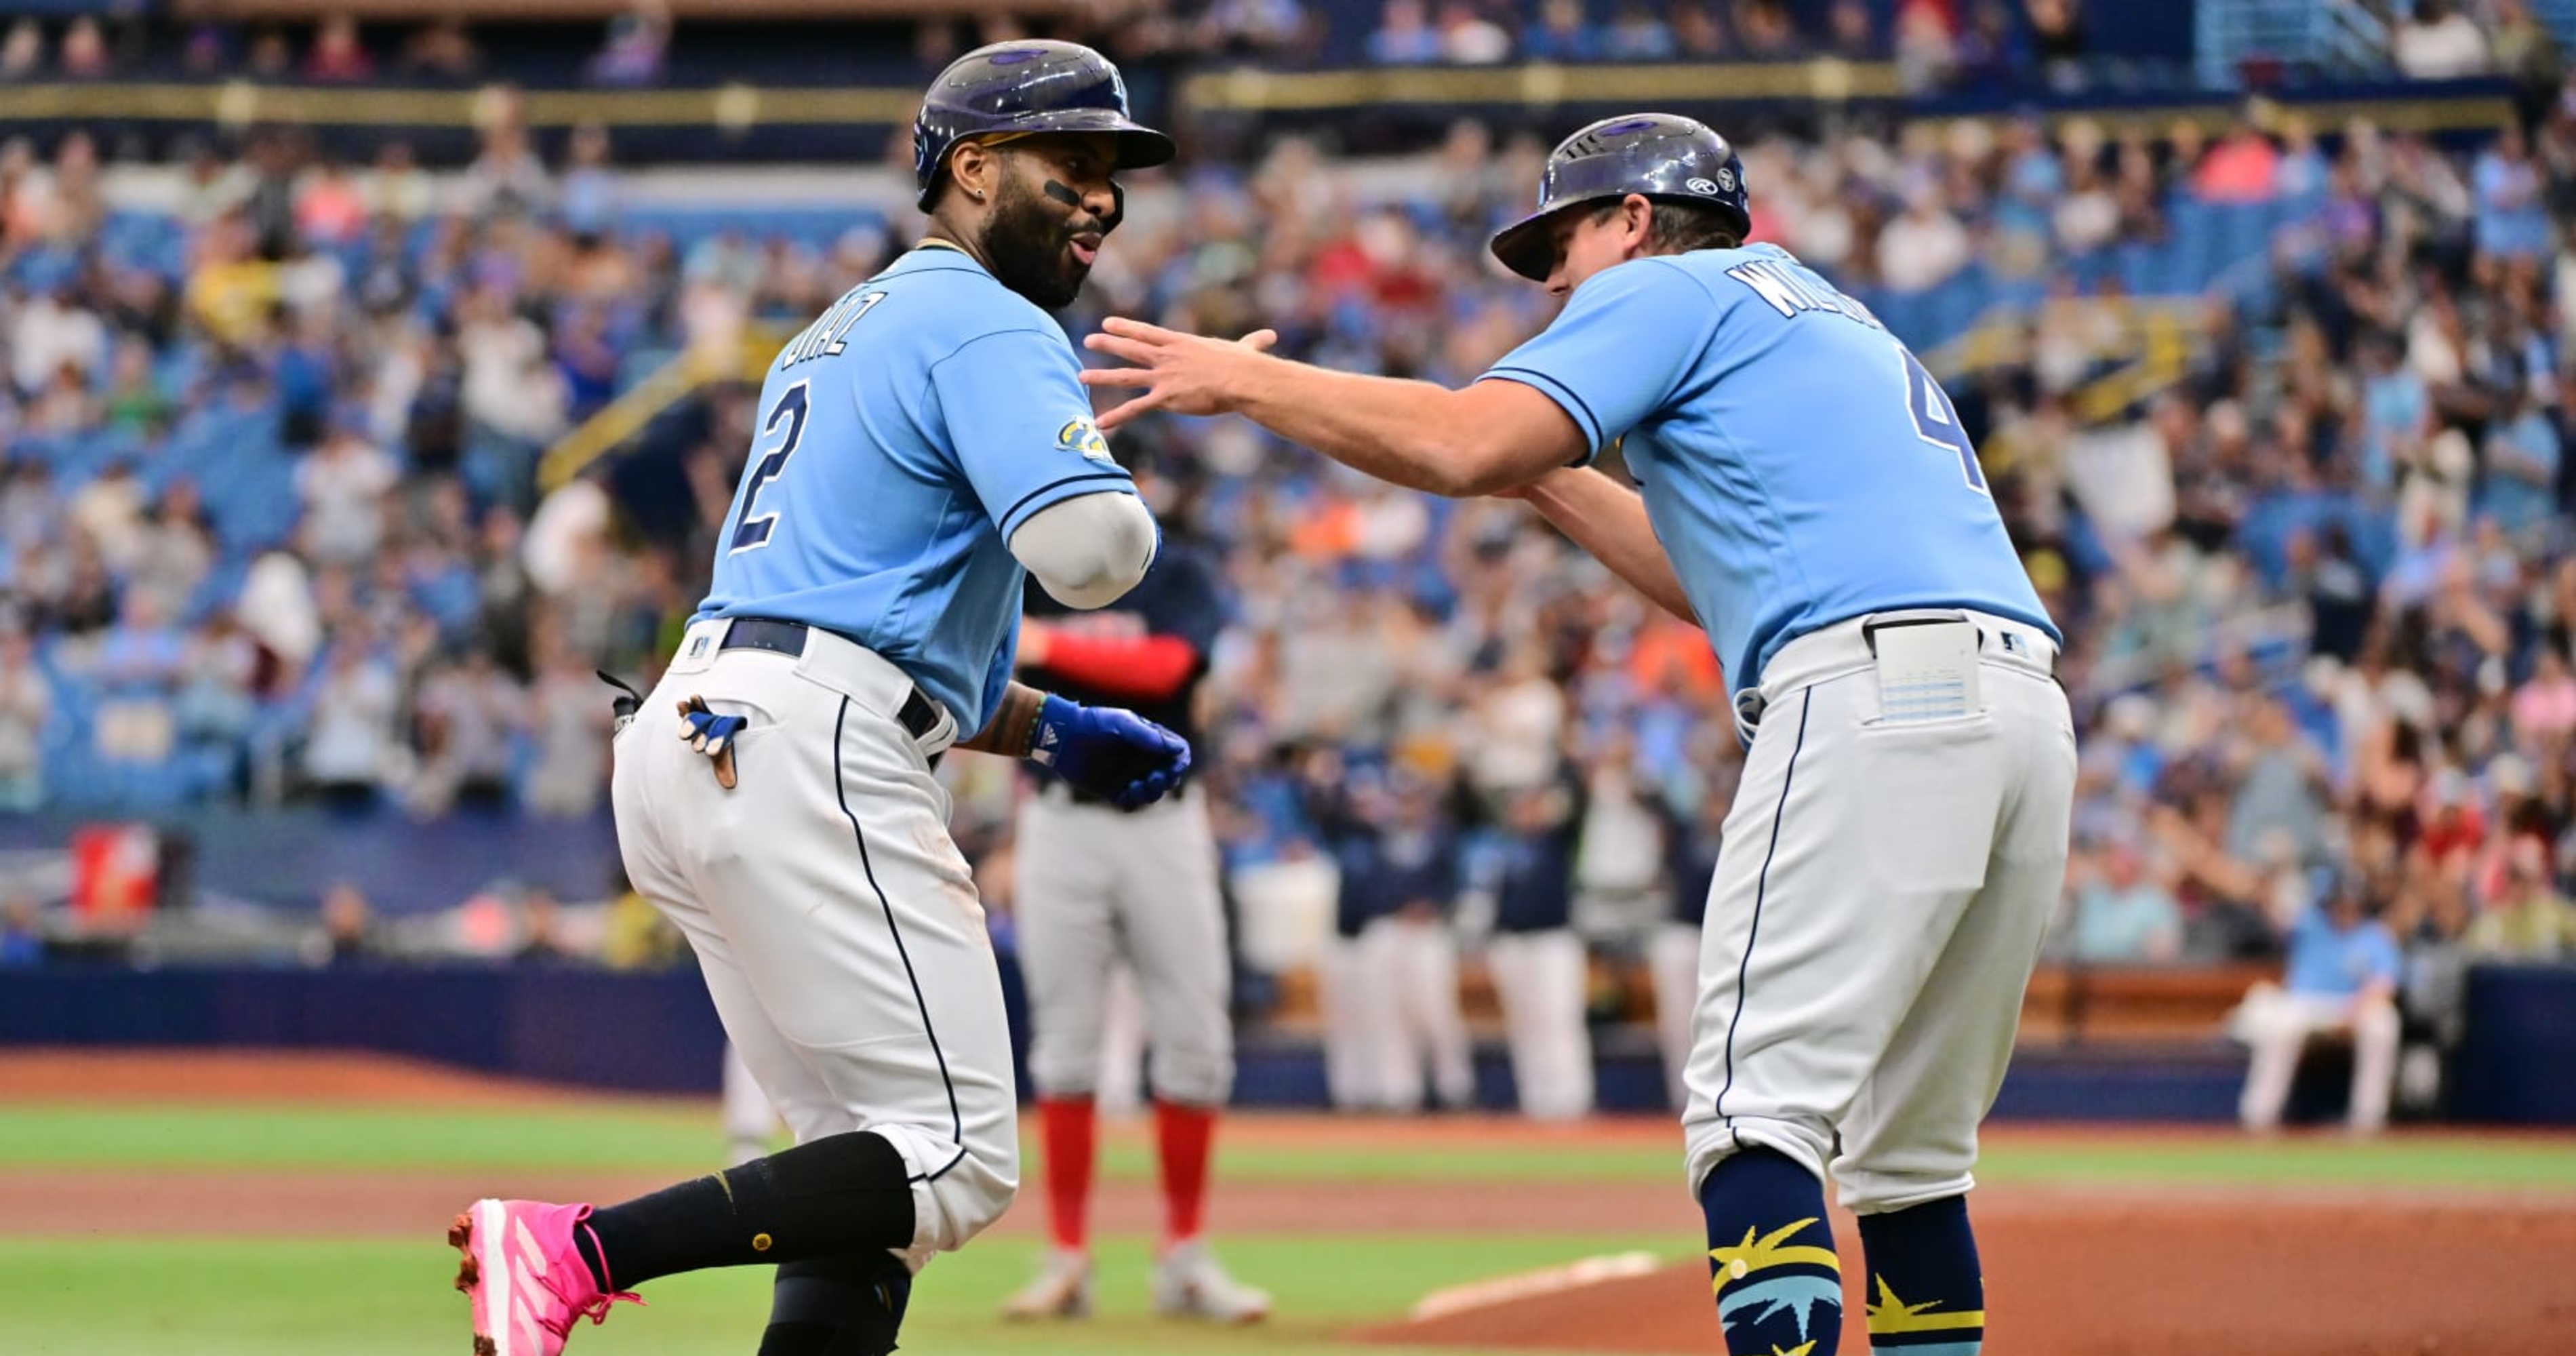 Tampa Bay Rays Look To Make It 12-0 In Historic MLB Start – Forbes